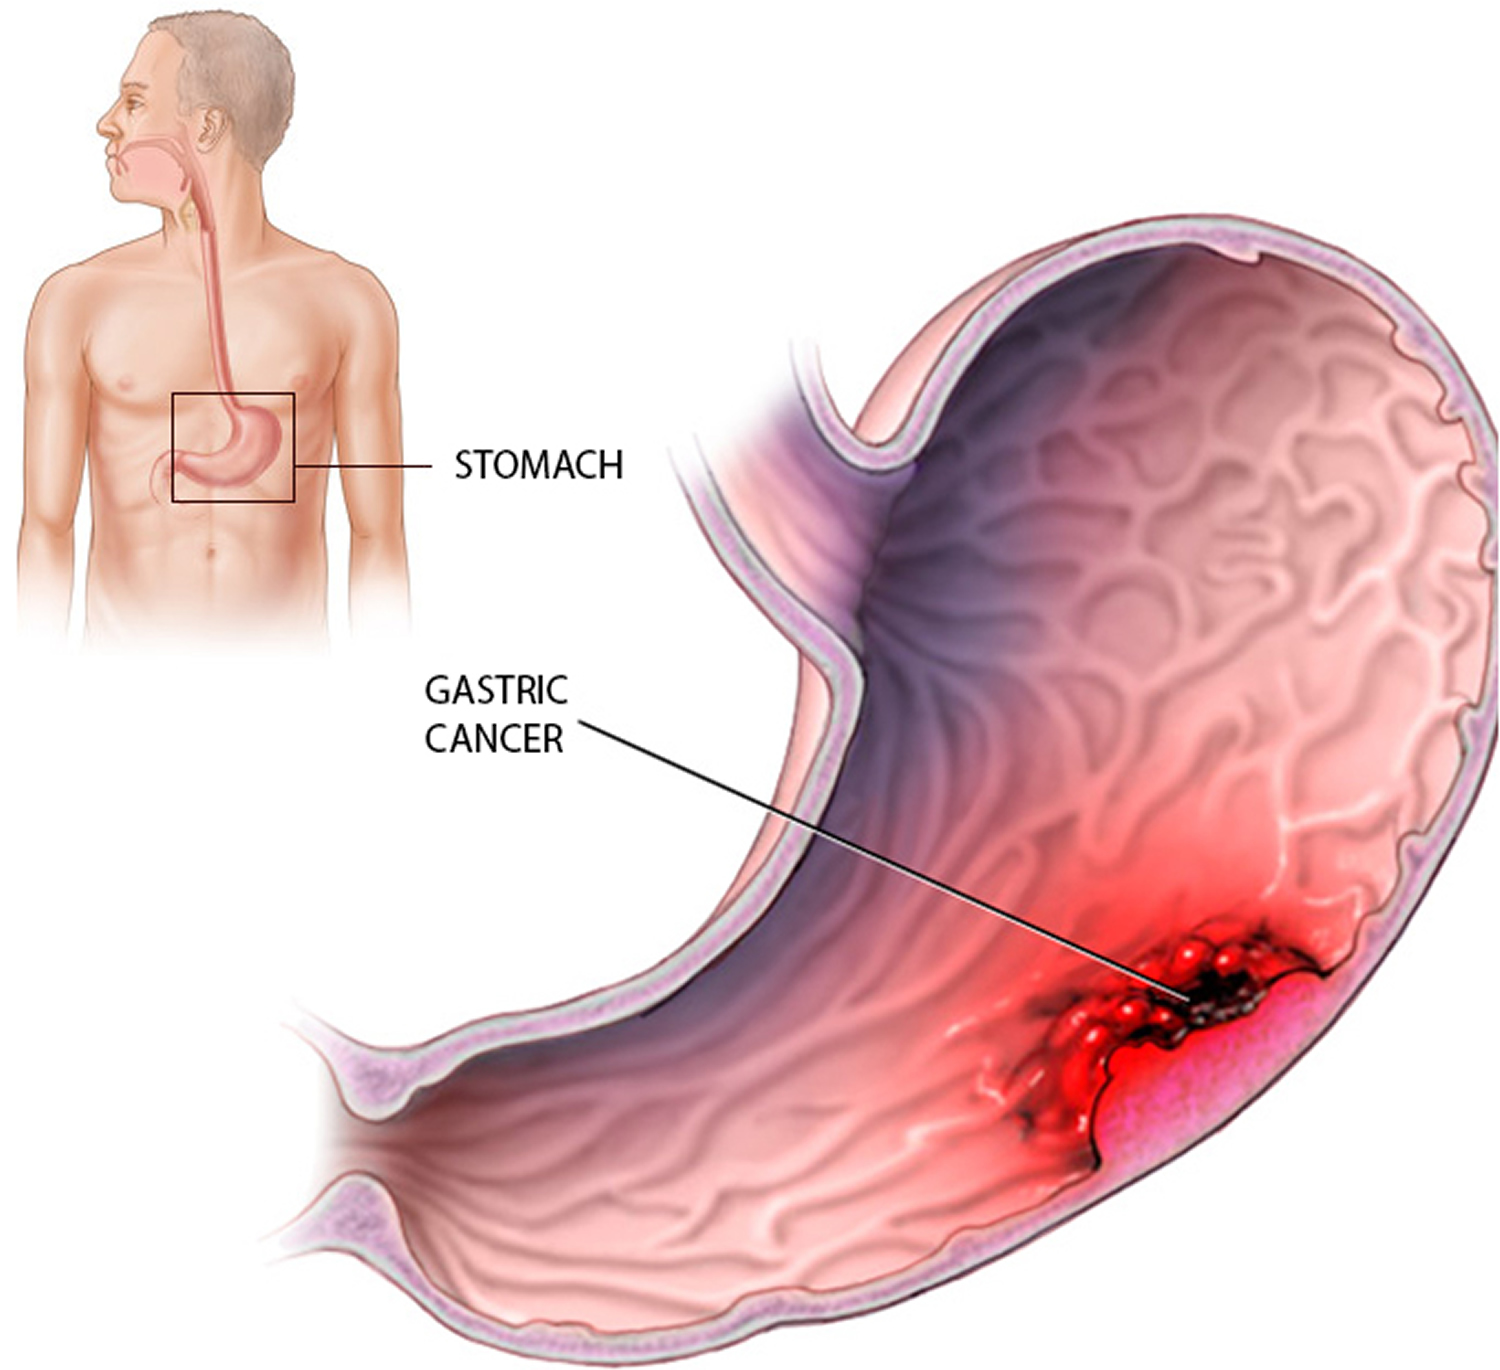 Stomach Cancer - Causes, Symptoms, Diagnosis and Treatment